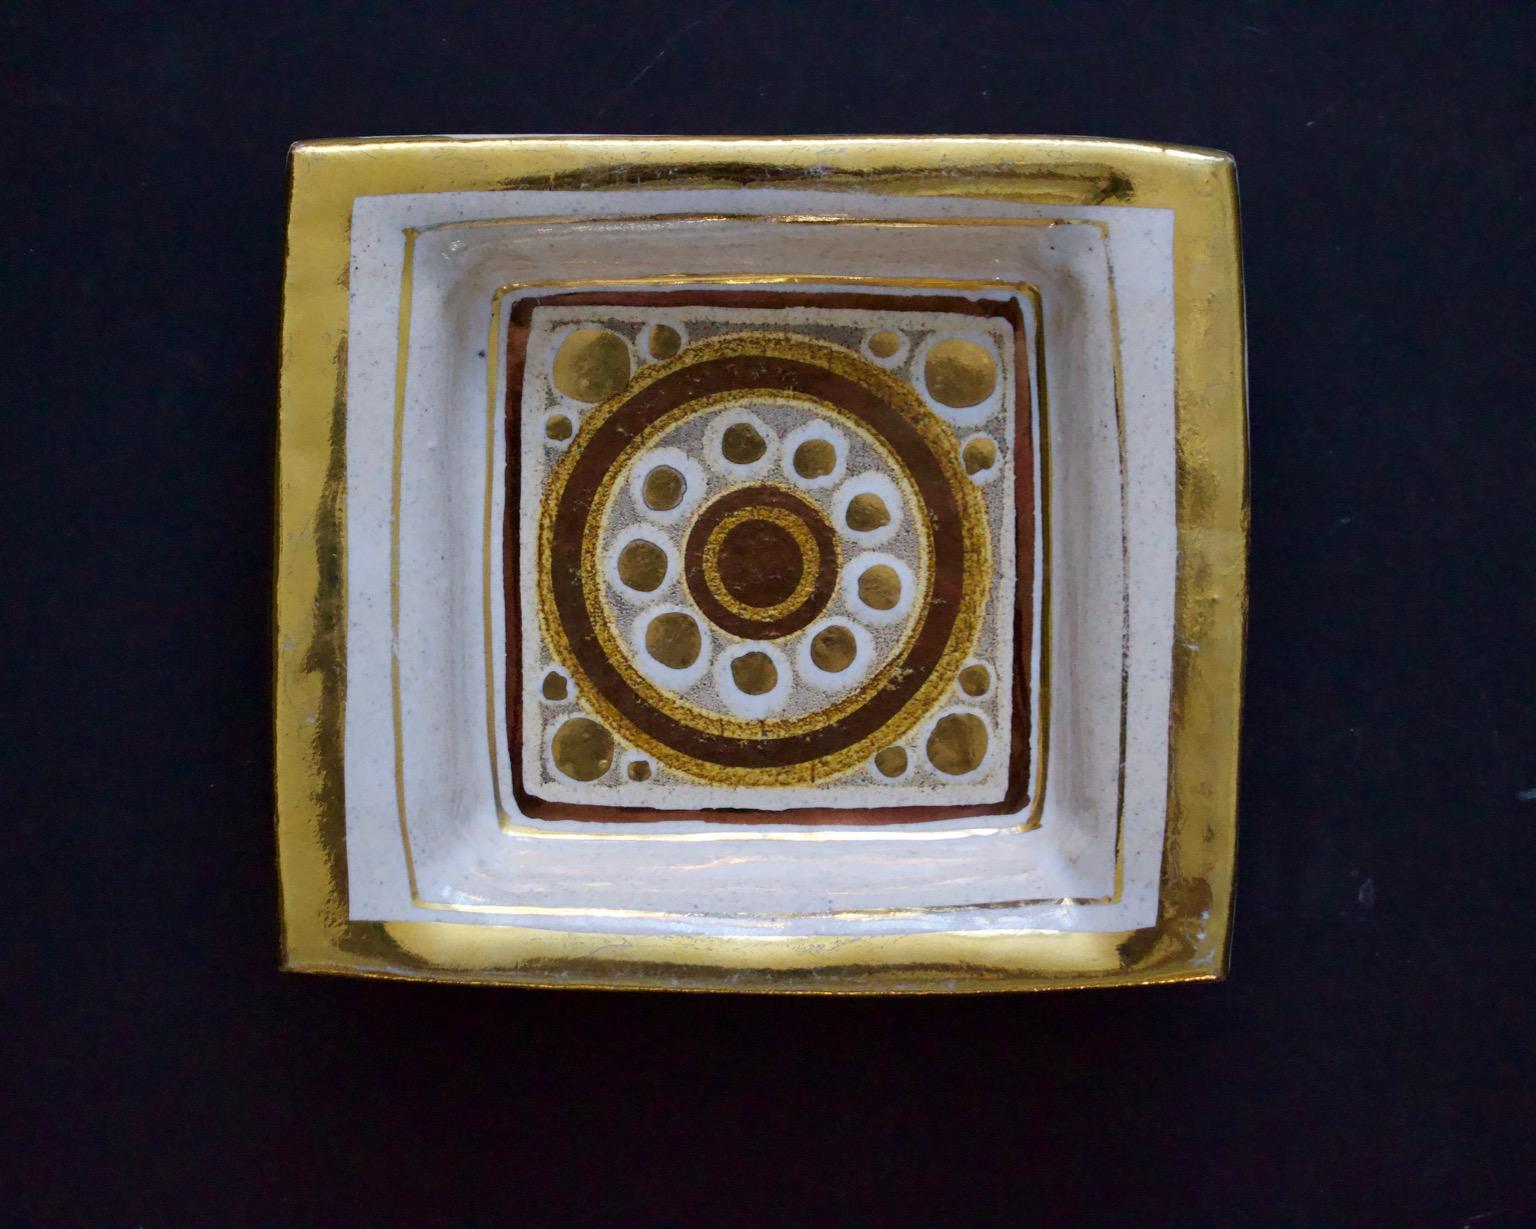 Small decorative dish or vide-poche by ceramicist Georges Pelletier, France.

Handmade ceramic, with an attractive design in off-white with gold and copper-lustre details. The piece is glazed with a mixture of glossy and matte finish. Mounted with